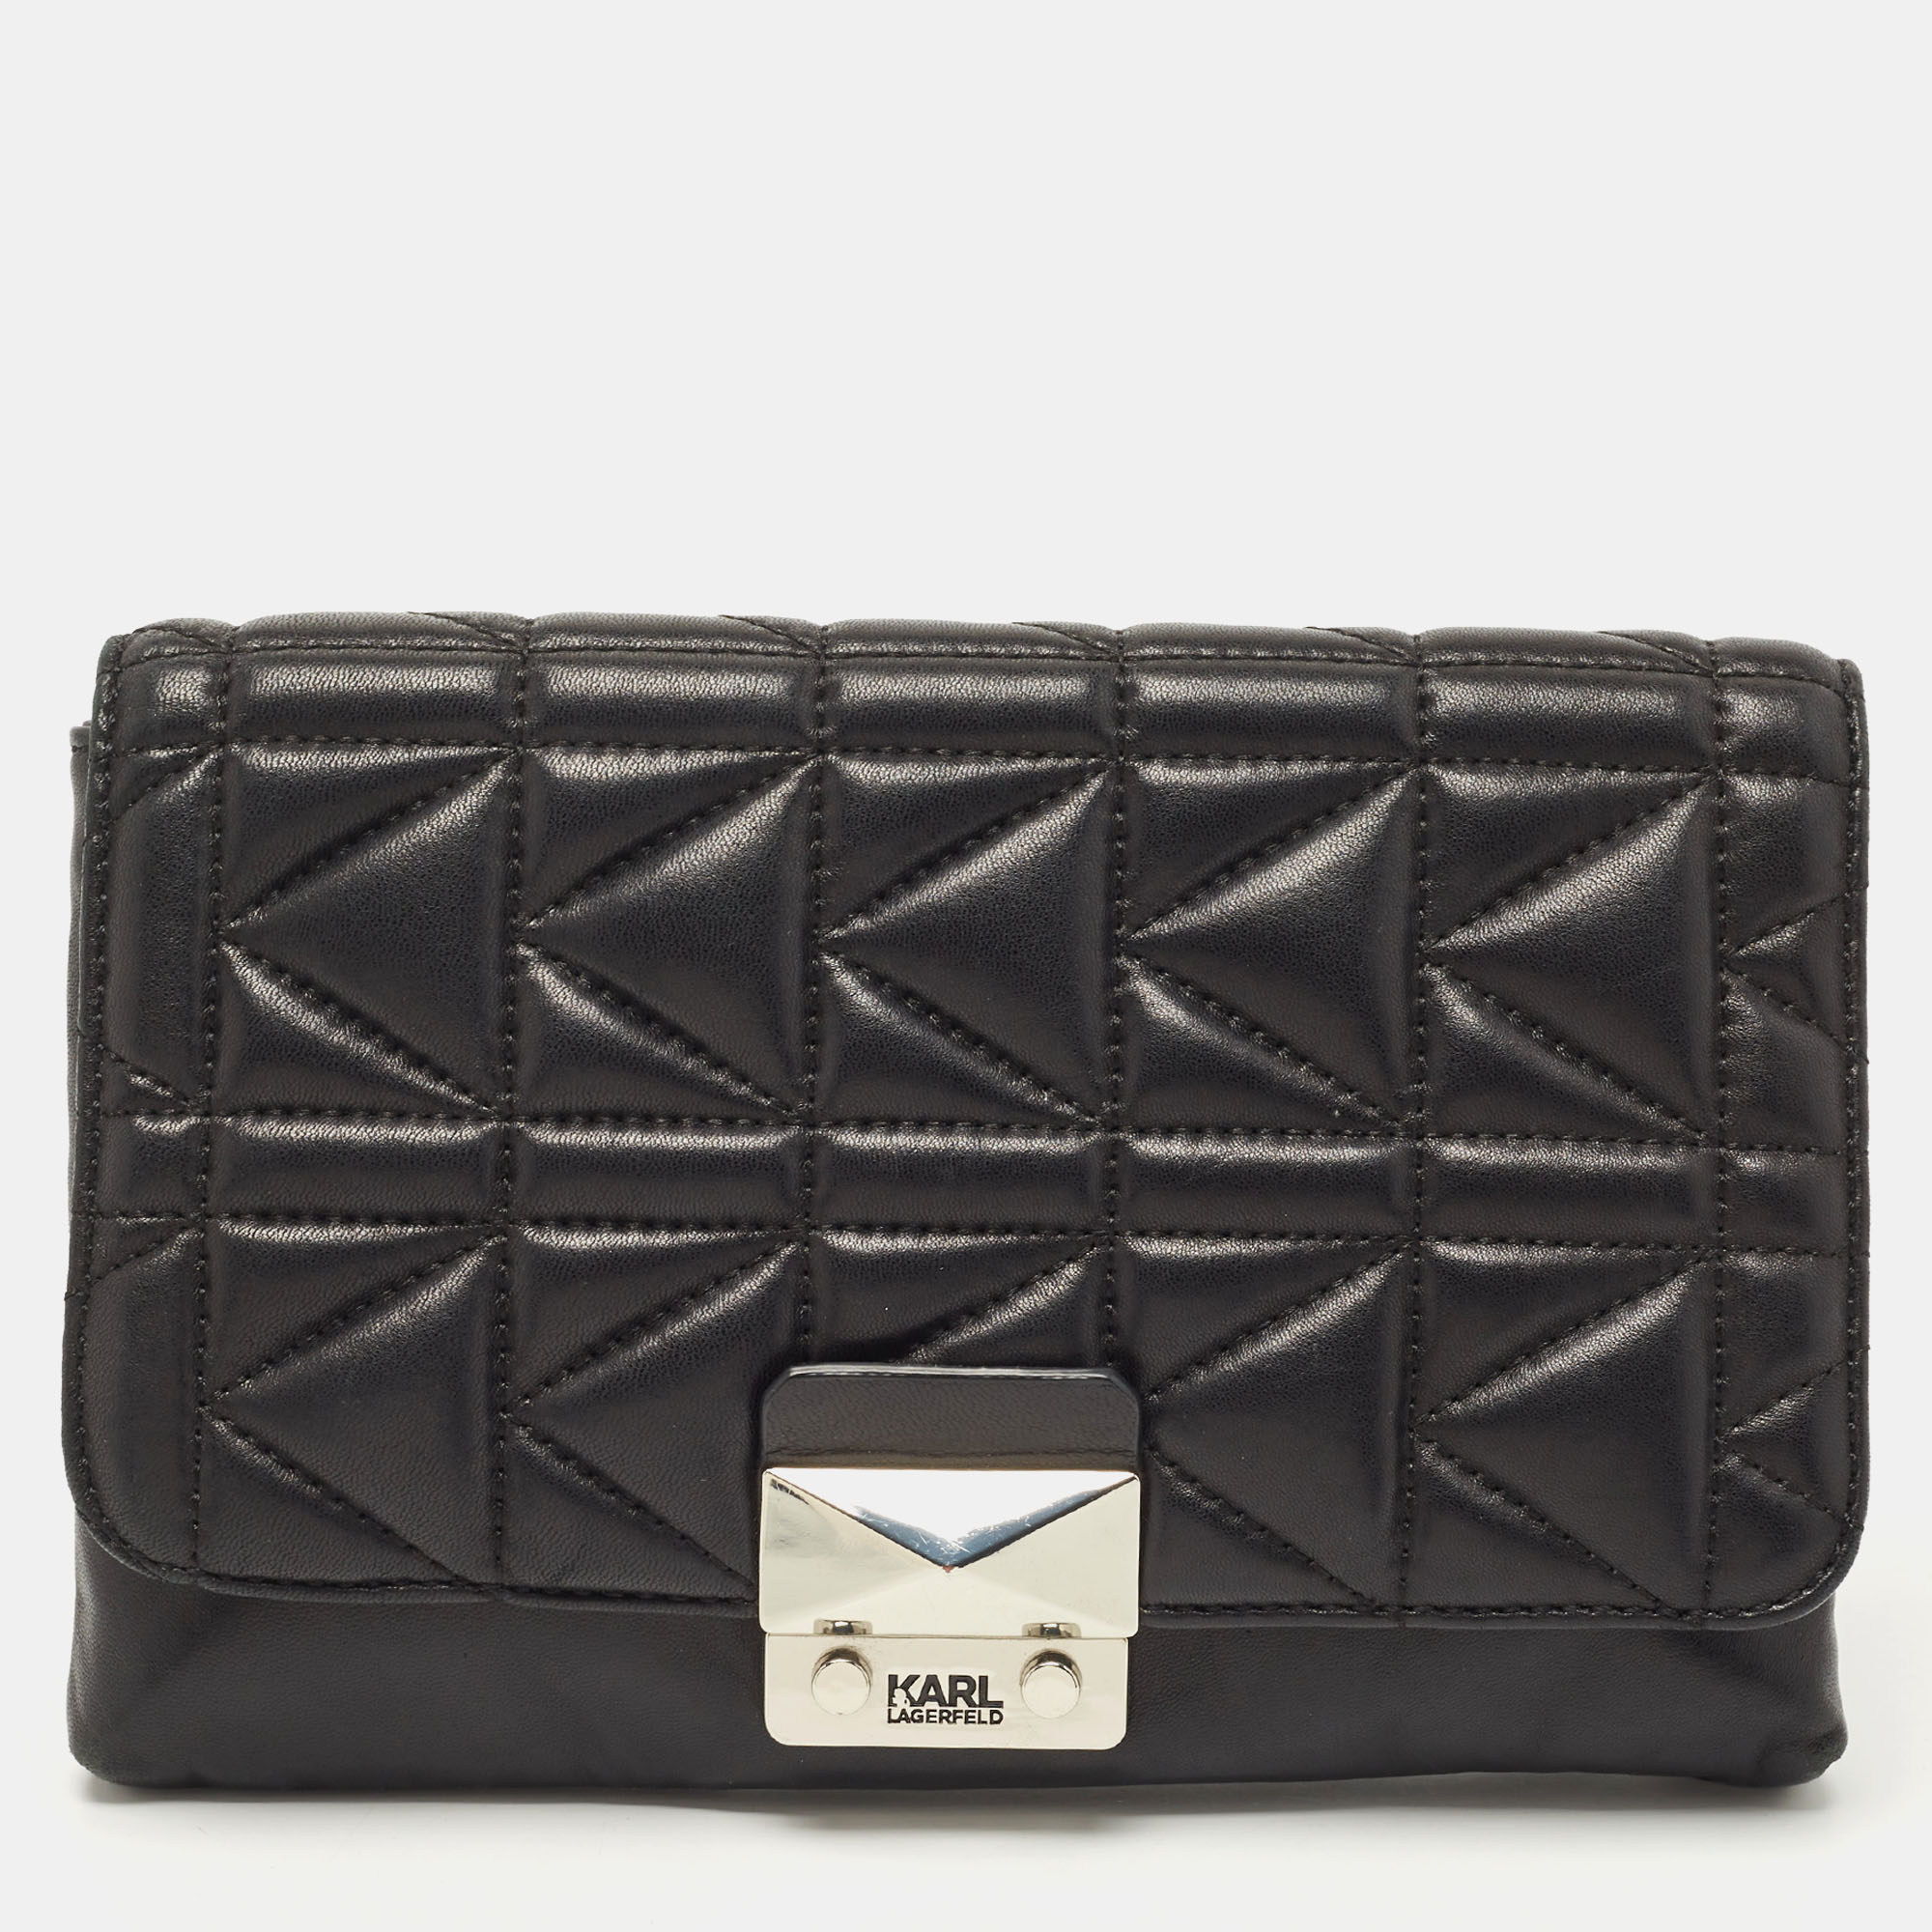 

Karl Lagerfeld Black Quilted Leather Pushlock Flap Clutch